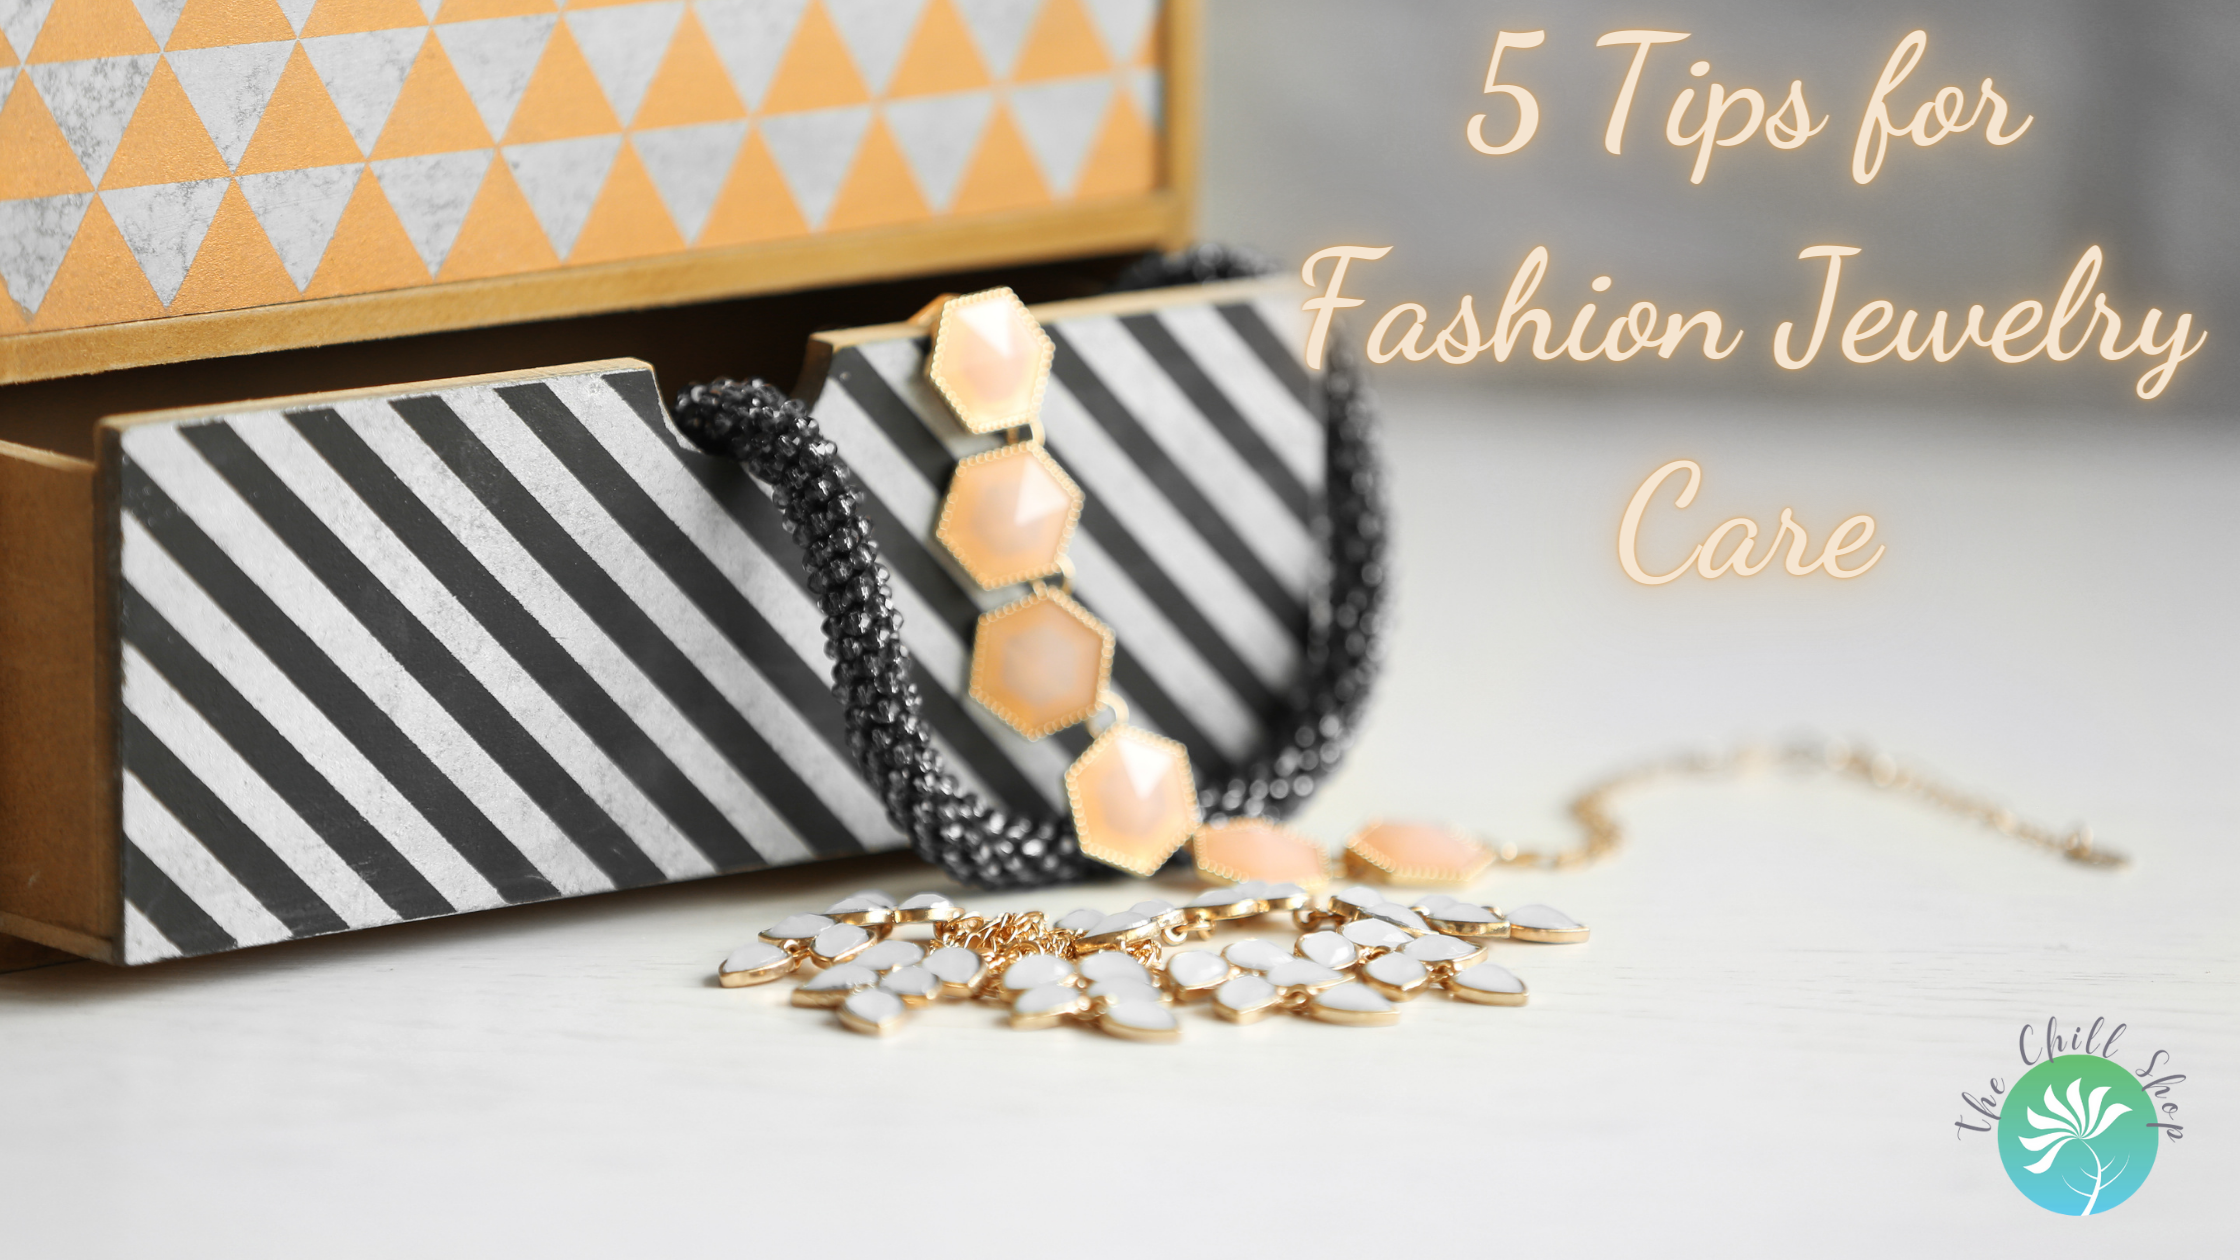 5 Tips for Fashion Jewelry Care